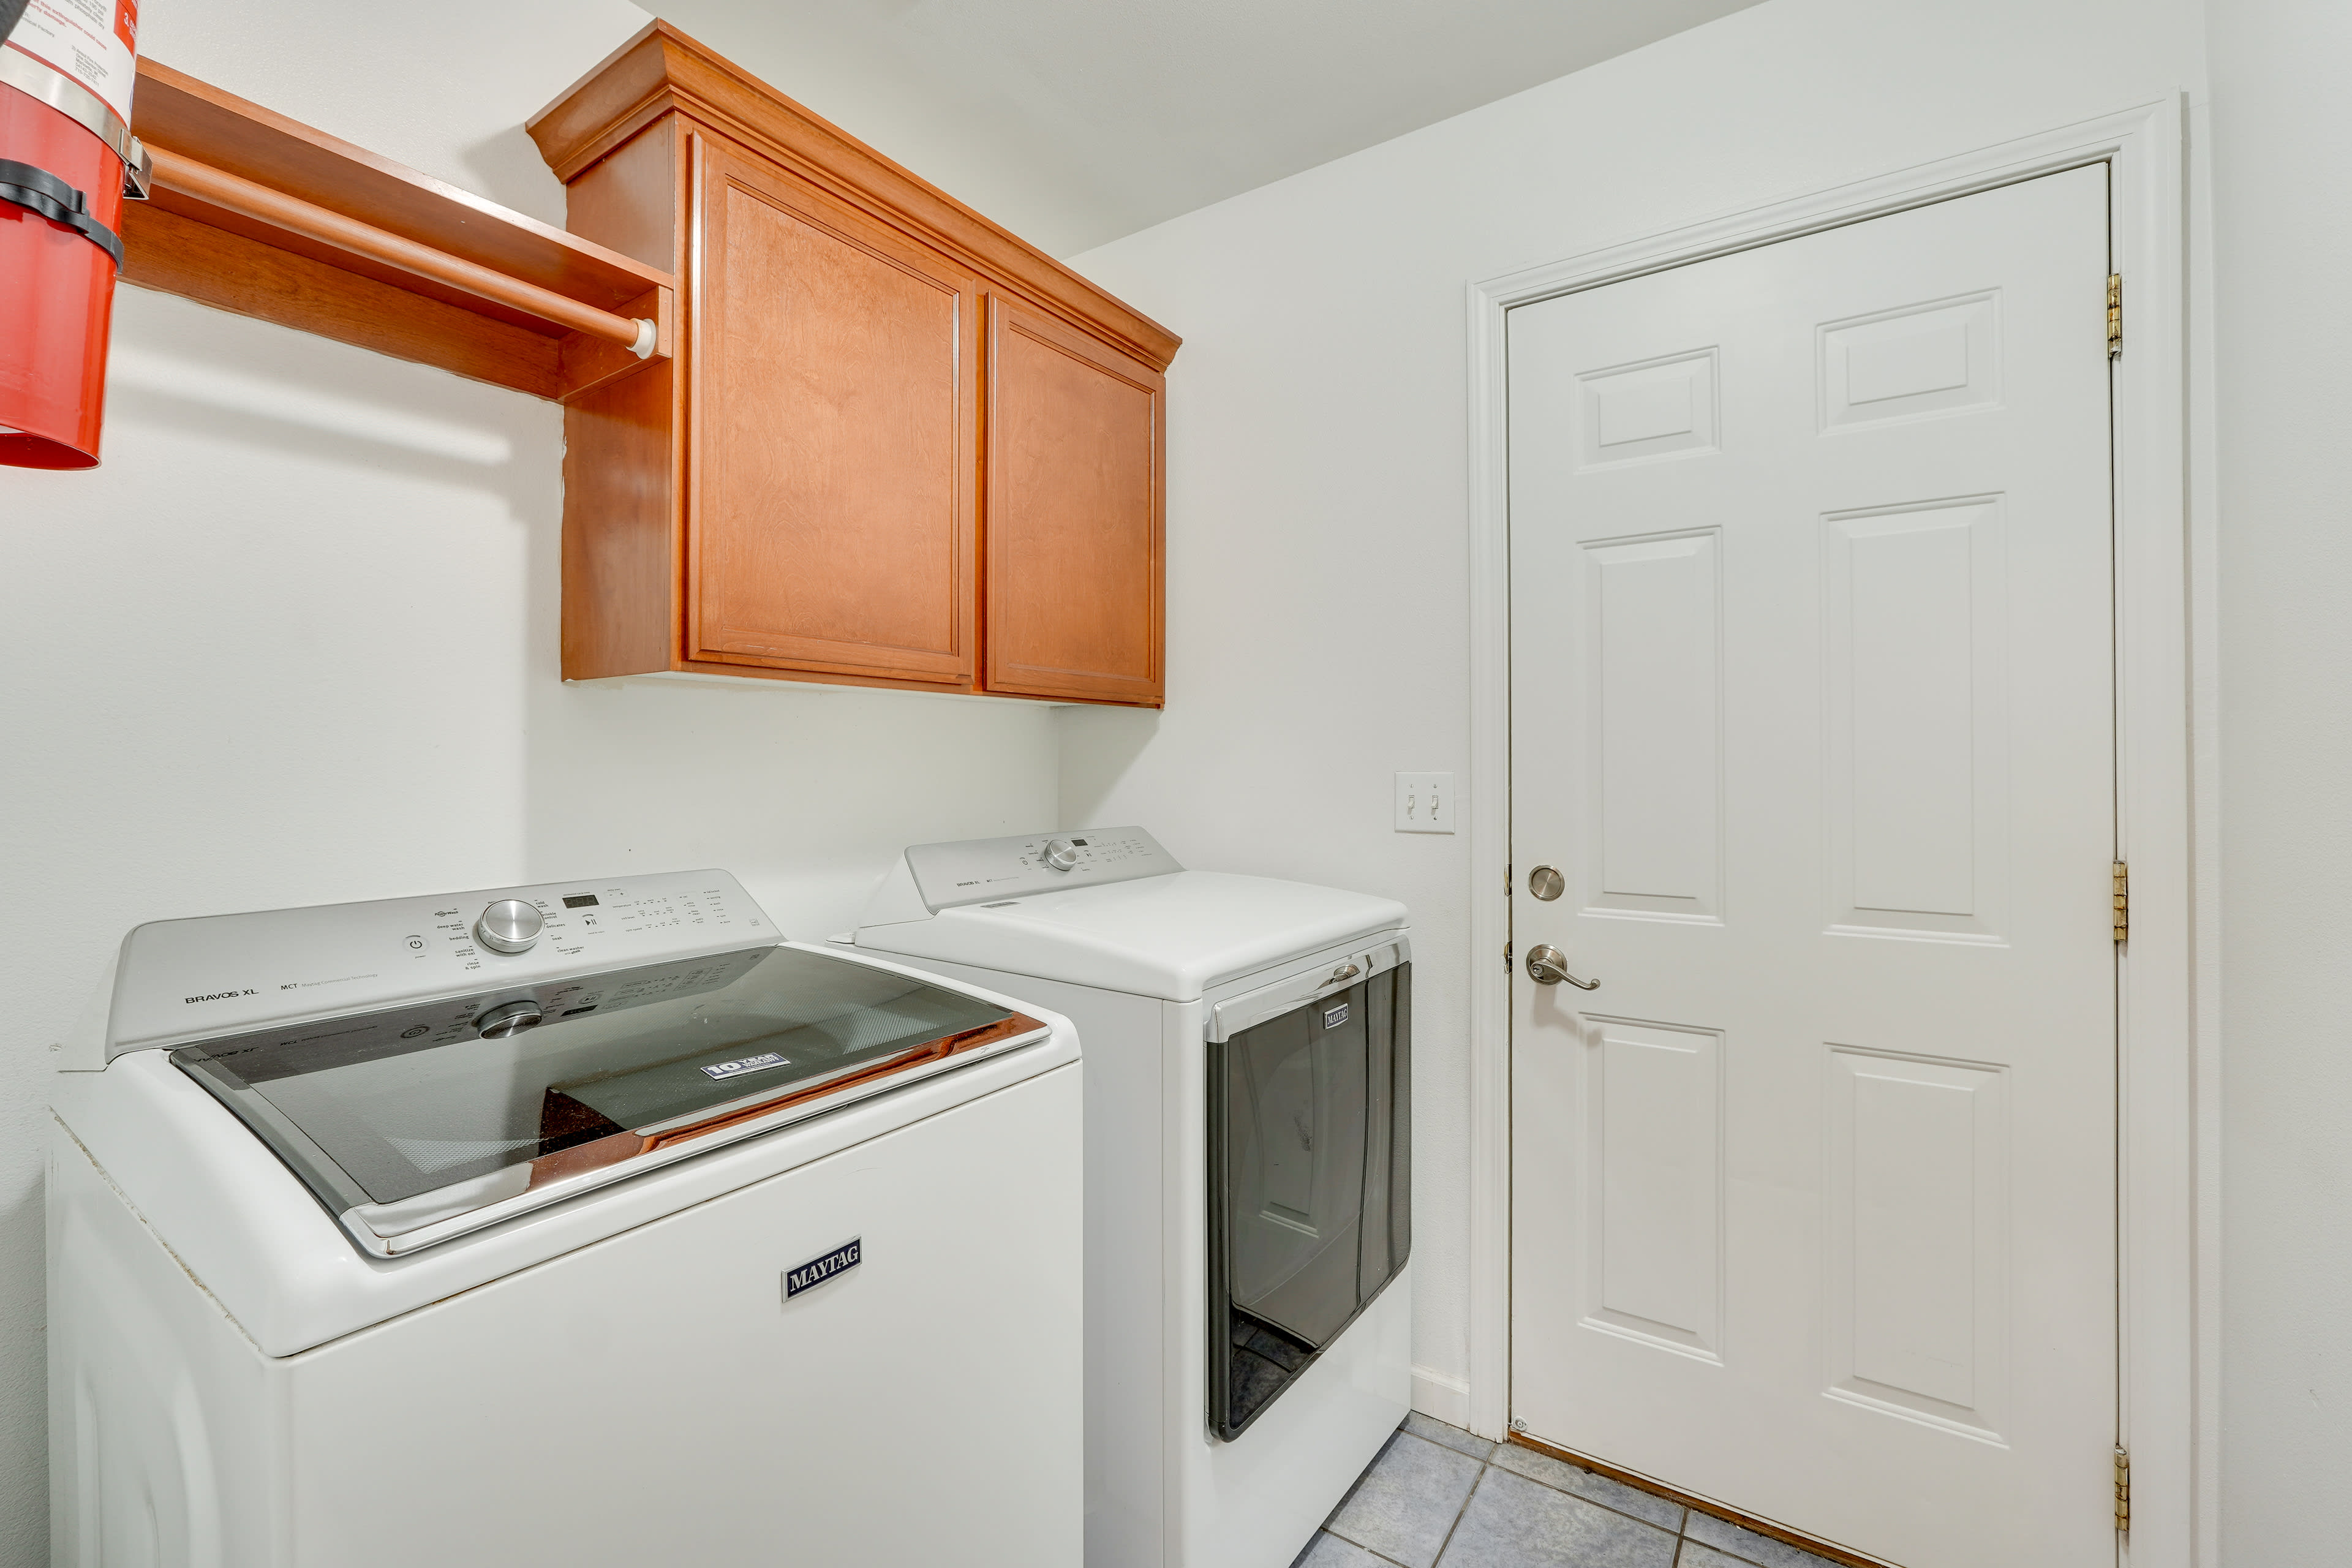 Laundry Room | Laundry Detergent Provided | Iron/Board